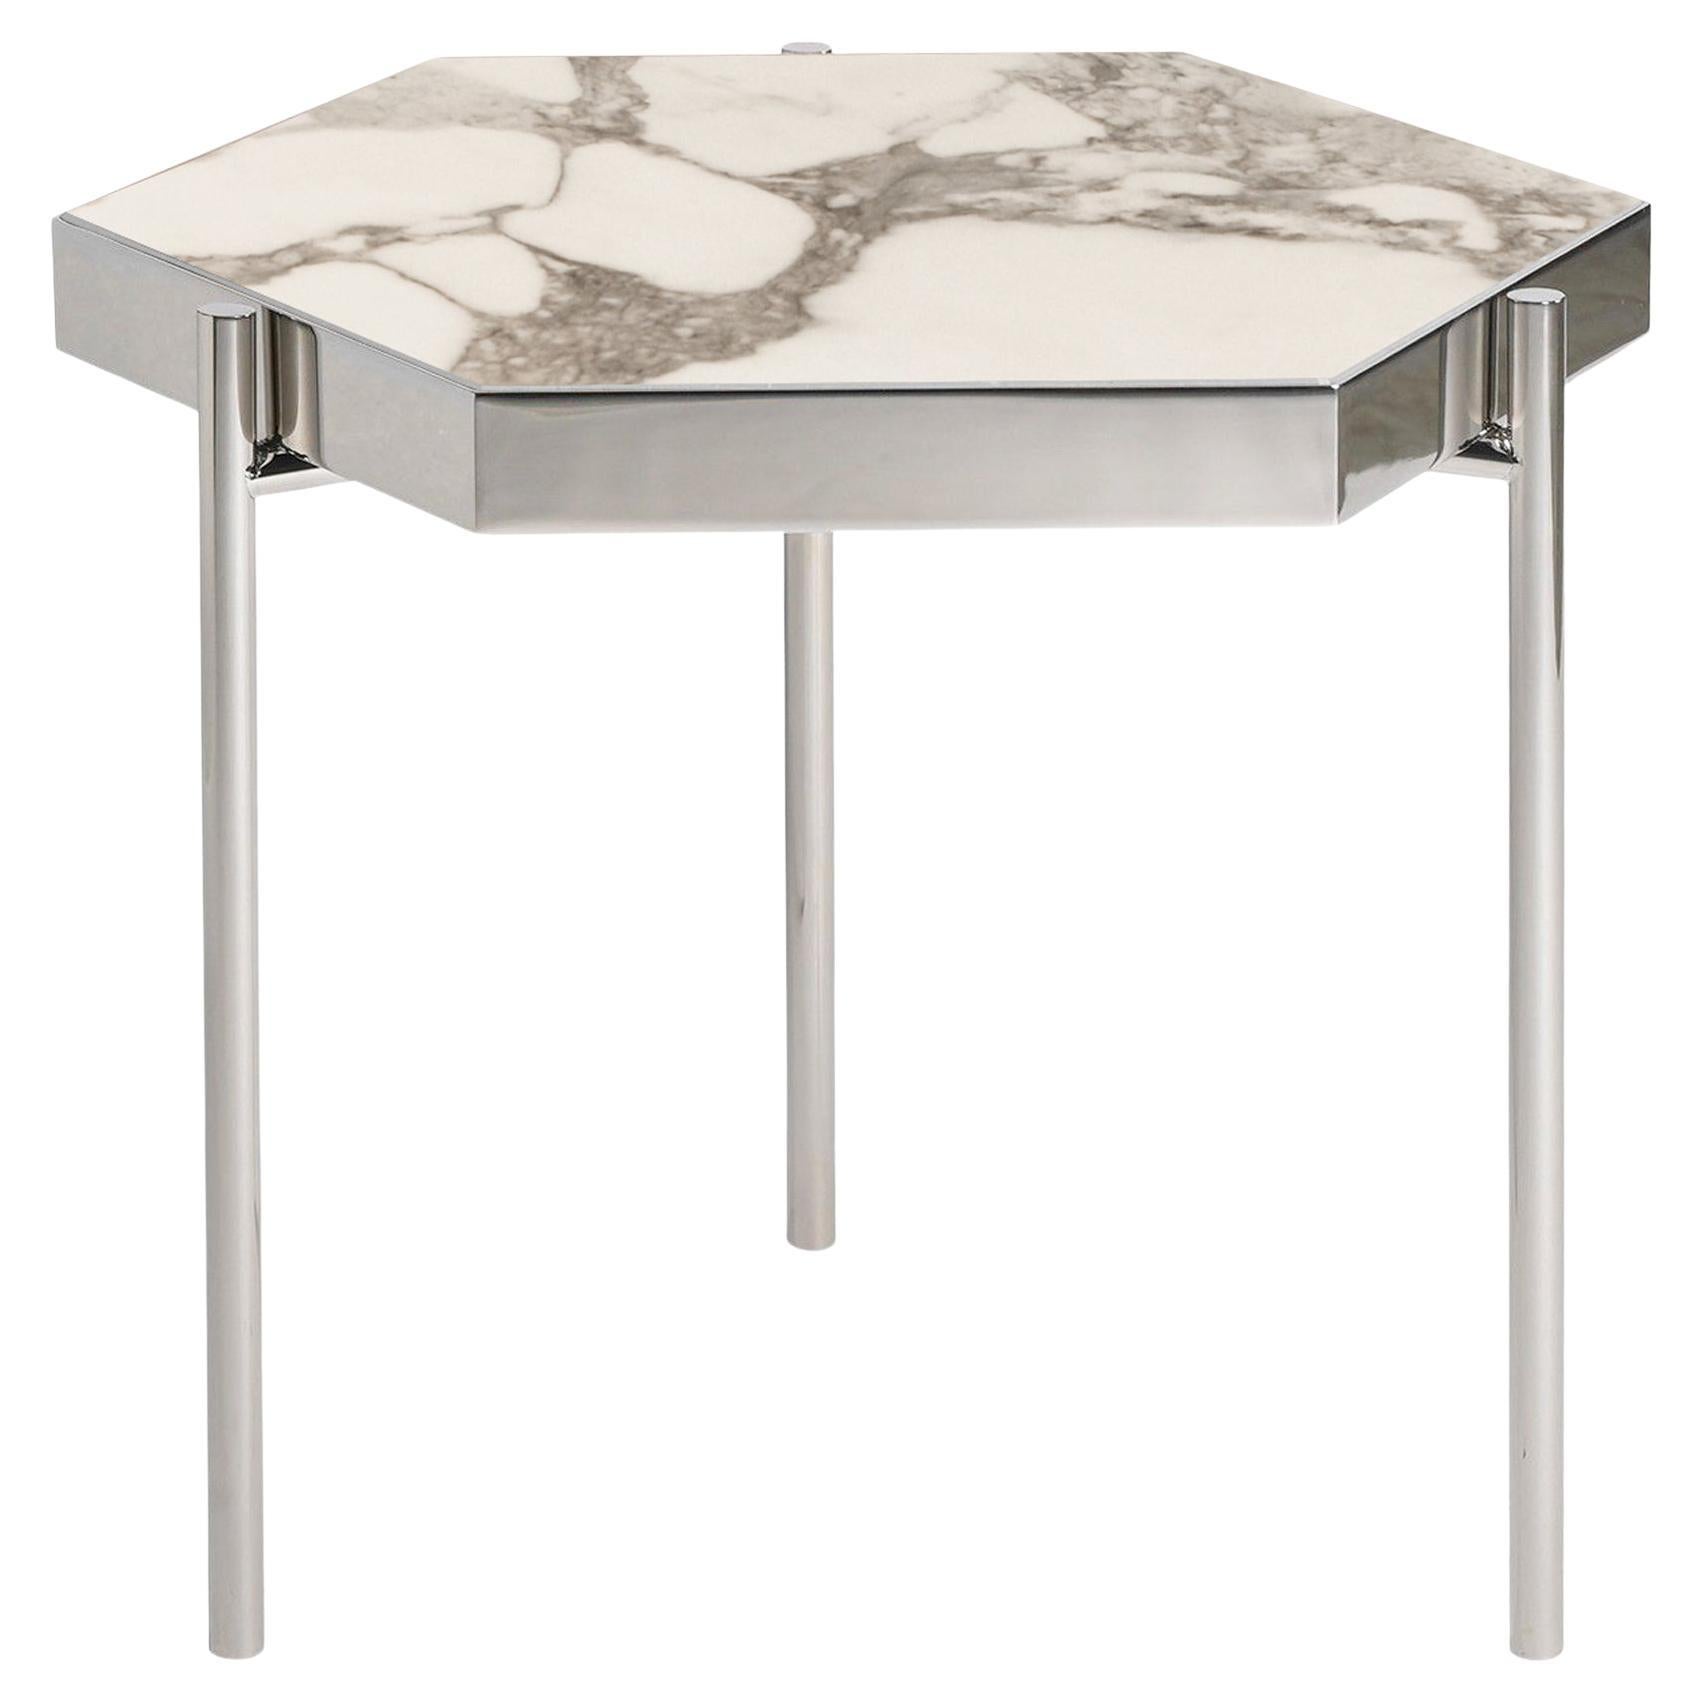 Pair of White Marble Staineless Steel Side Hexagonal Tables For Sale